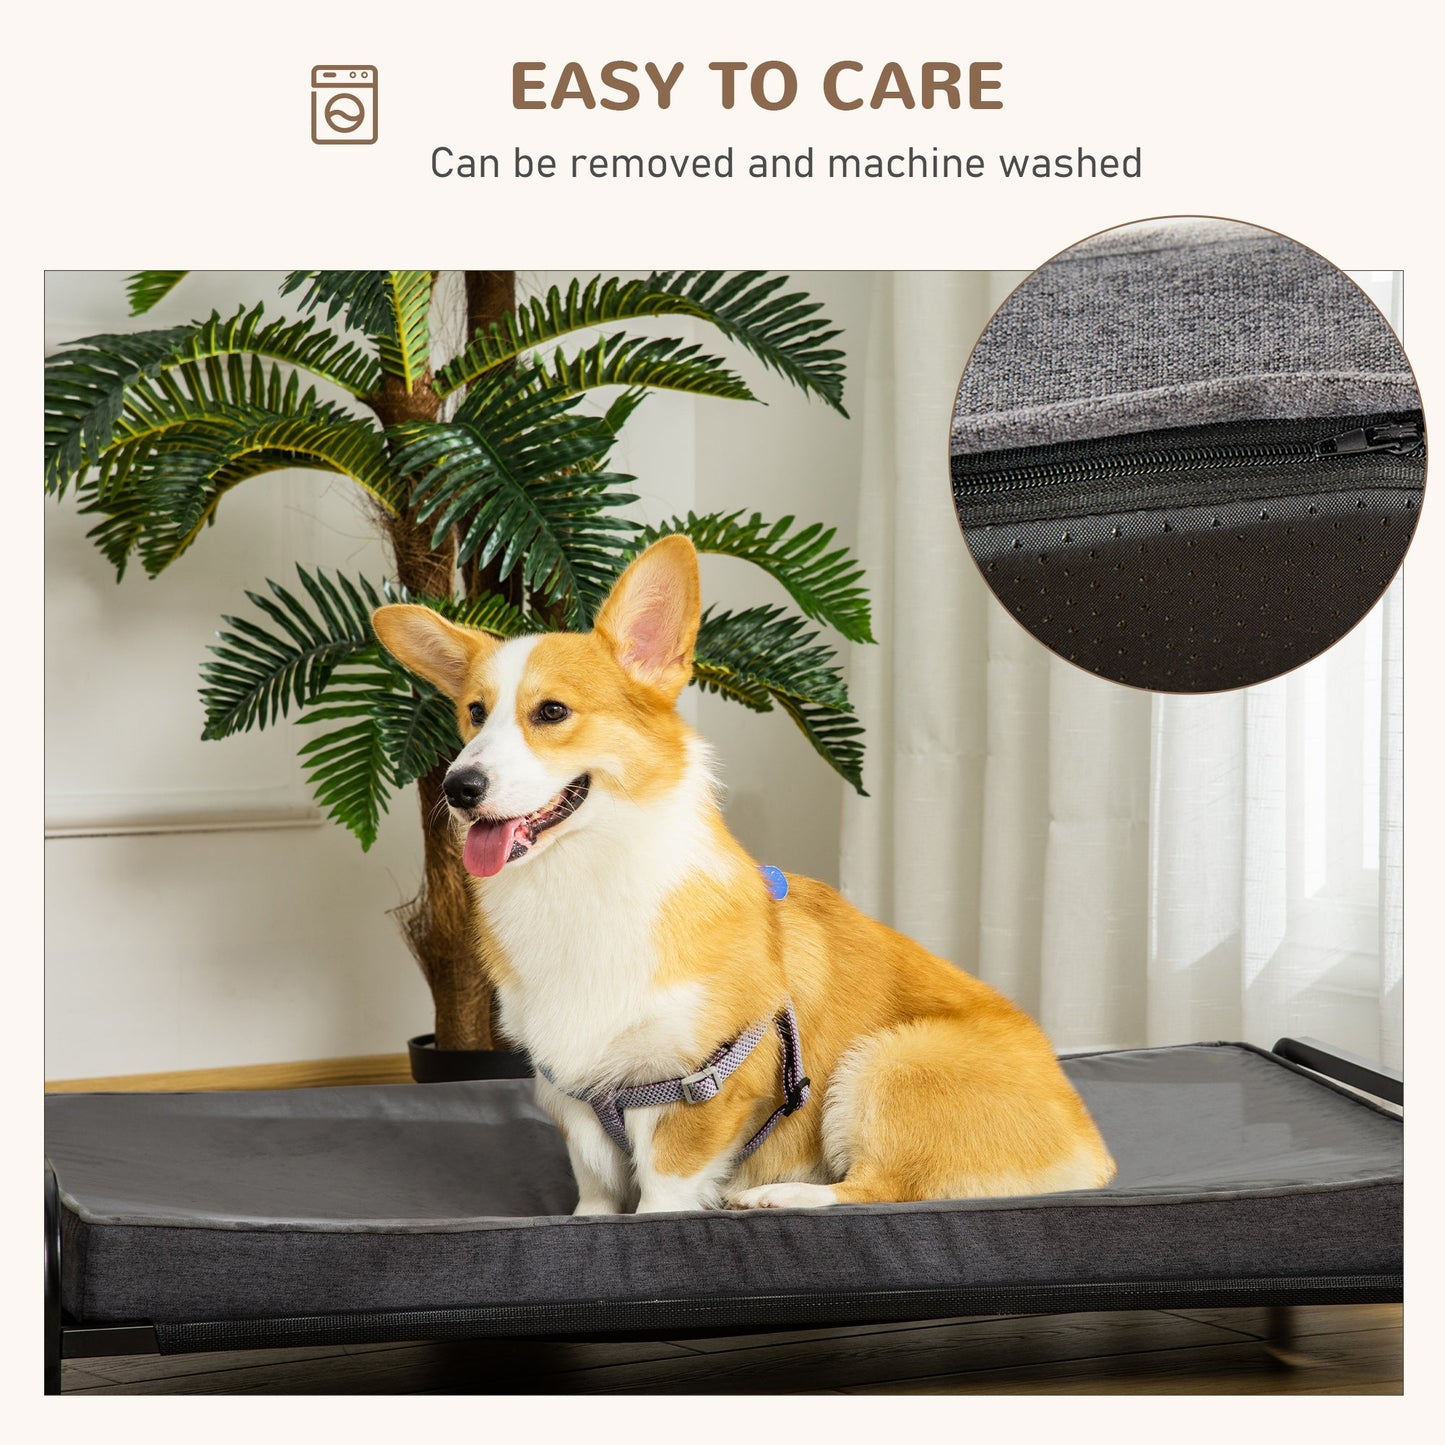 2-IN-1 Elevated Pet Bed for Large &; Medium-Sized Dog Steel Frame Removable Sponge Cushion Breathable Linen Fabric, Grey, 43.25"x25.5"x7.75" at Gallery Canada